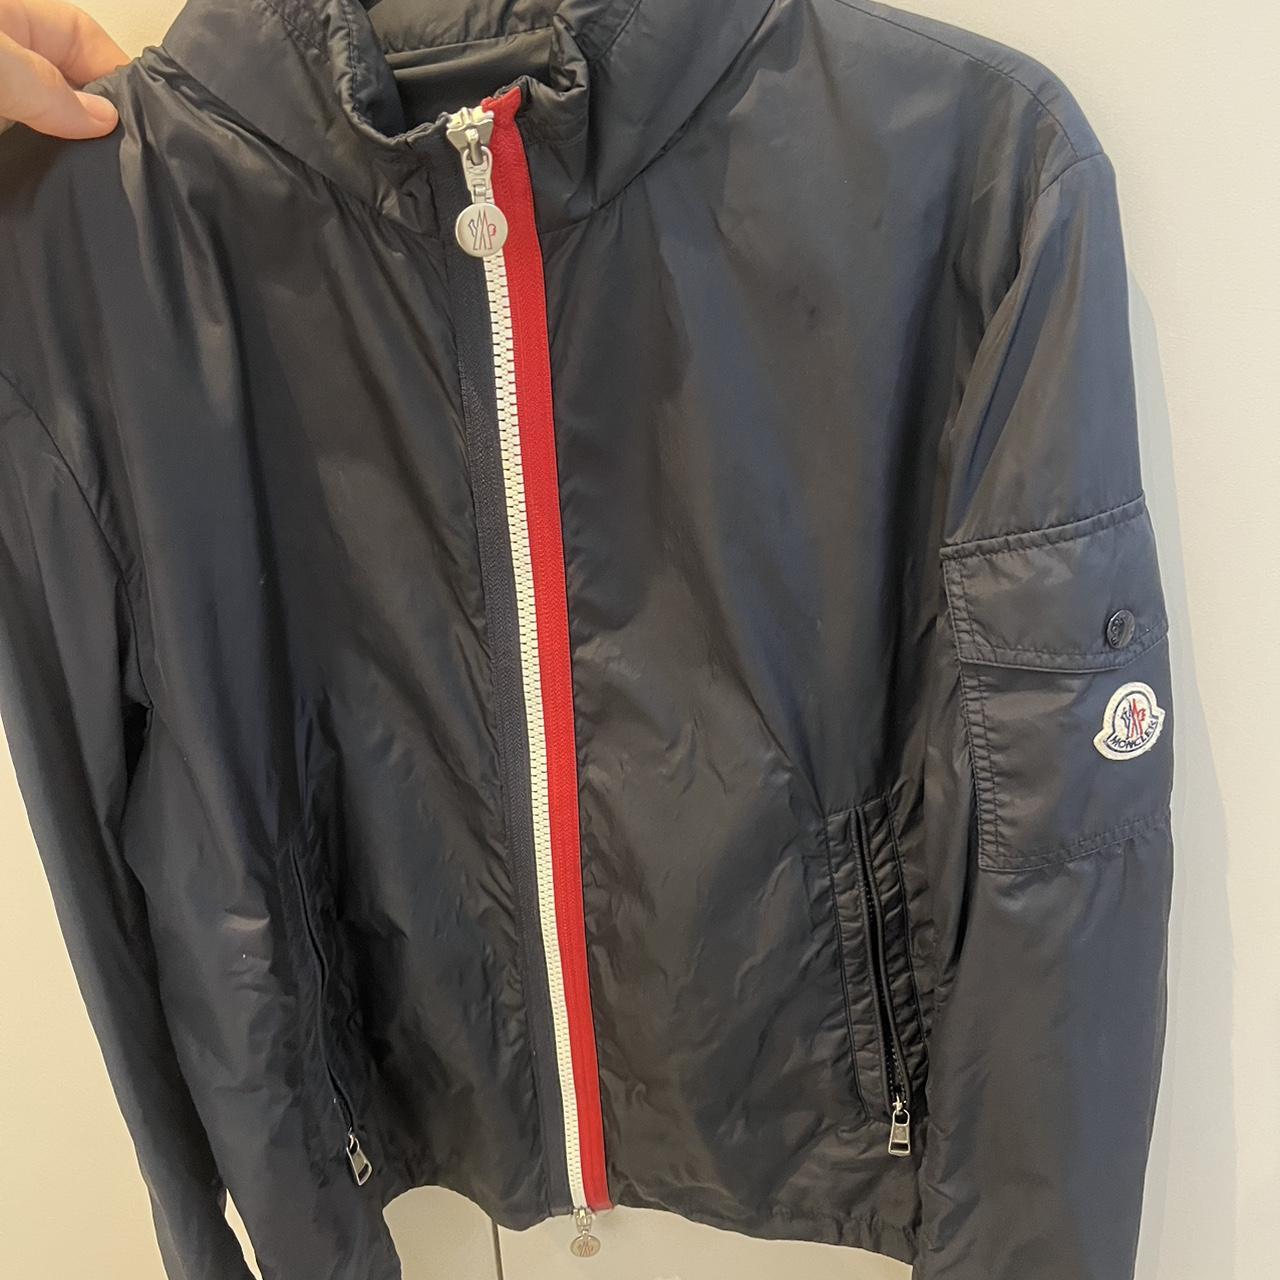 Moncler men’s light jacket Great condition and... - Depop